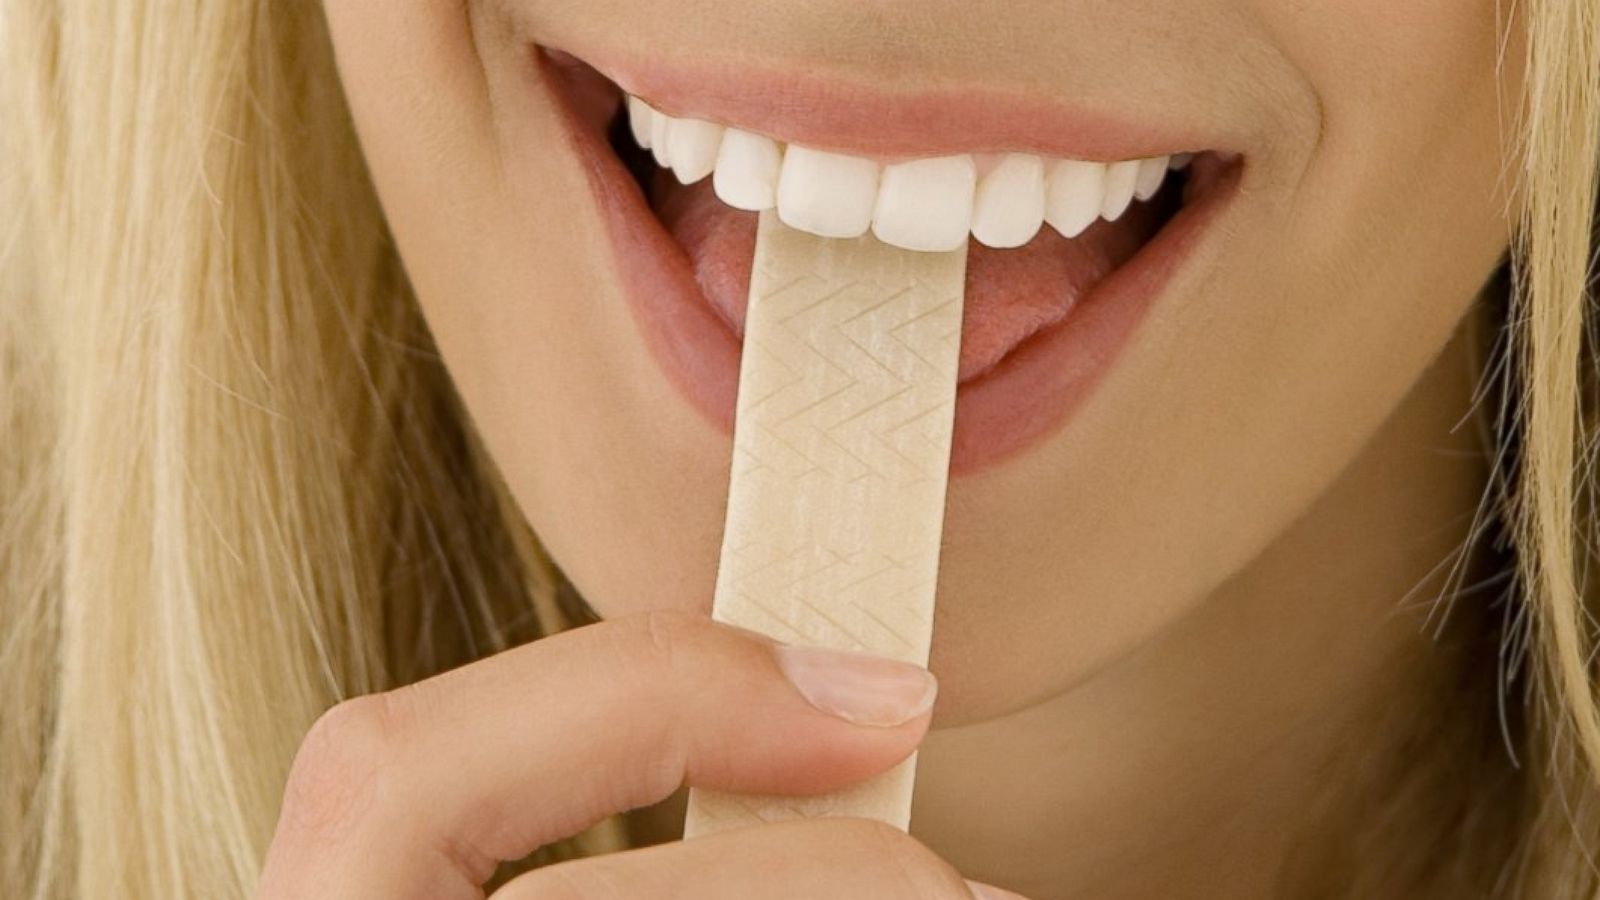 Sticky situation: Harmful food chemicals in chewing gum